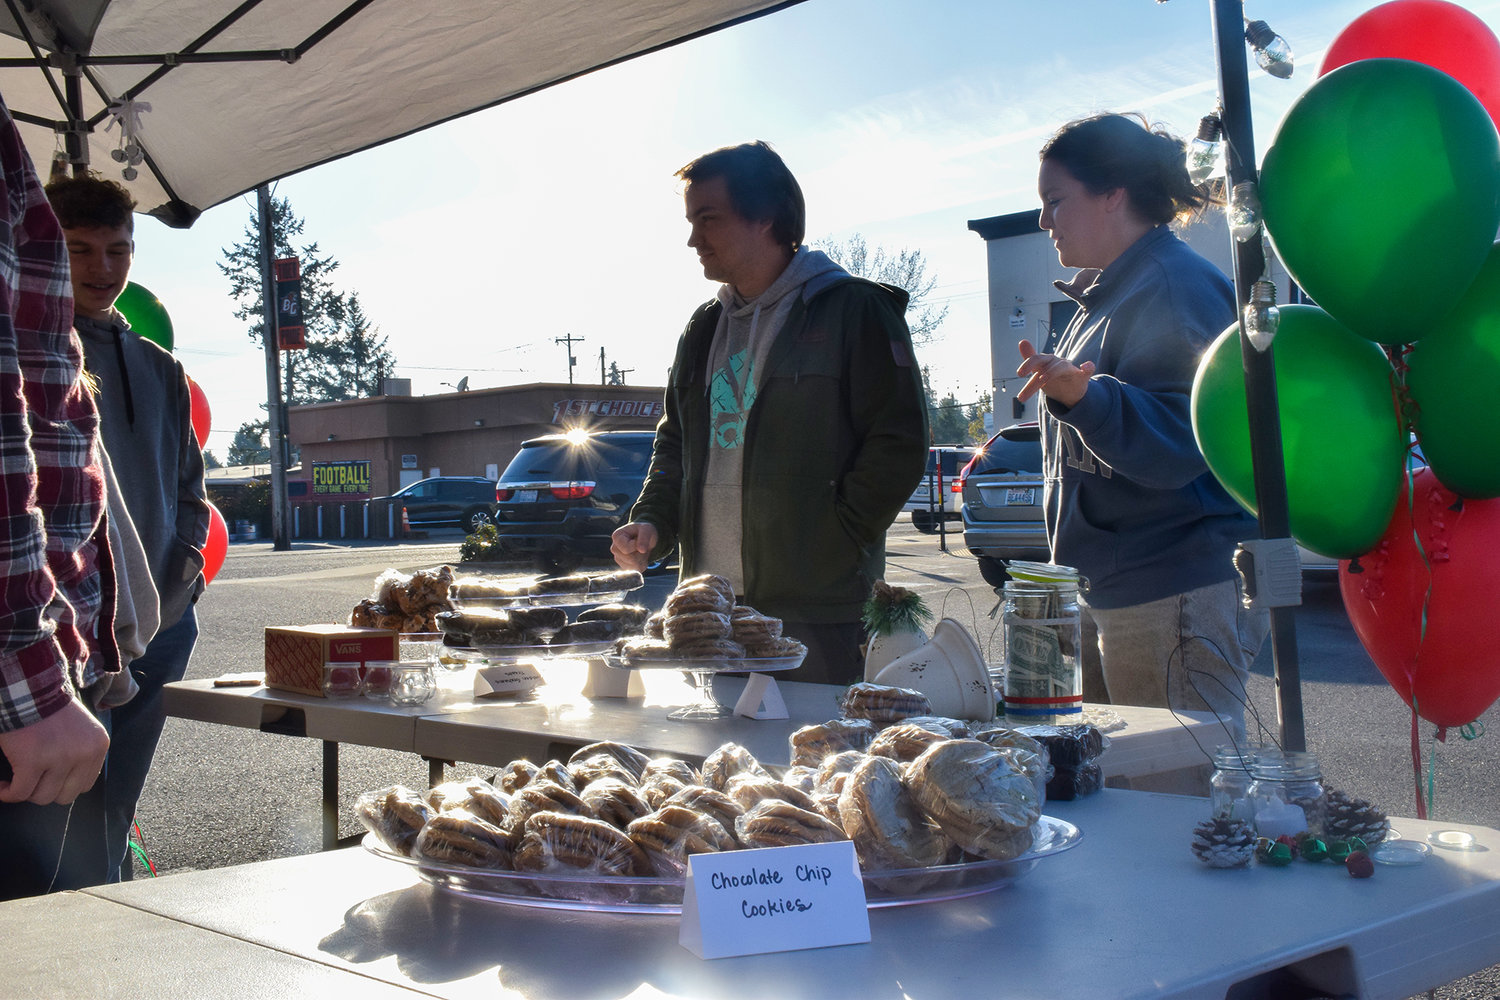 Patrons purchase baked goods during a fundraiser hosted by Battle Ground teen Hannah Boyett in the parking lot of the Margarita Factory on Nov. 20.  The money raised will help support a family in need.